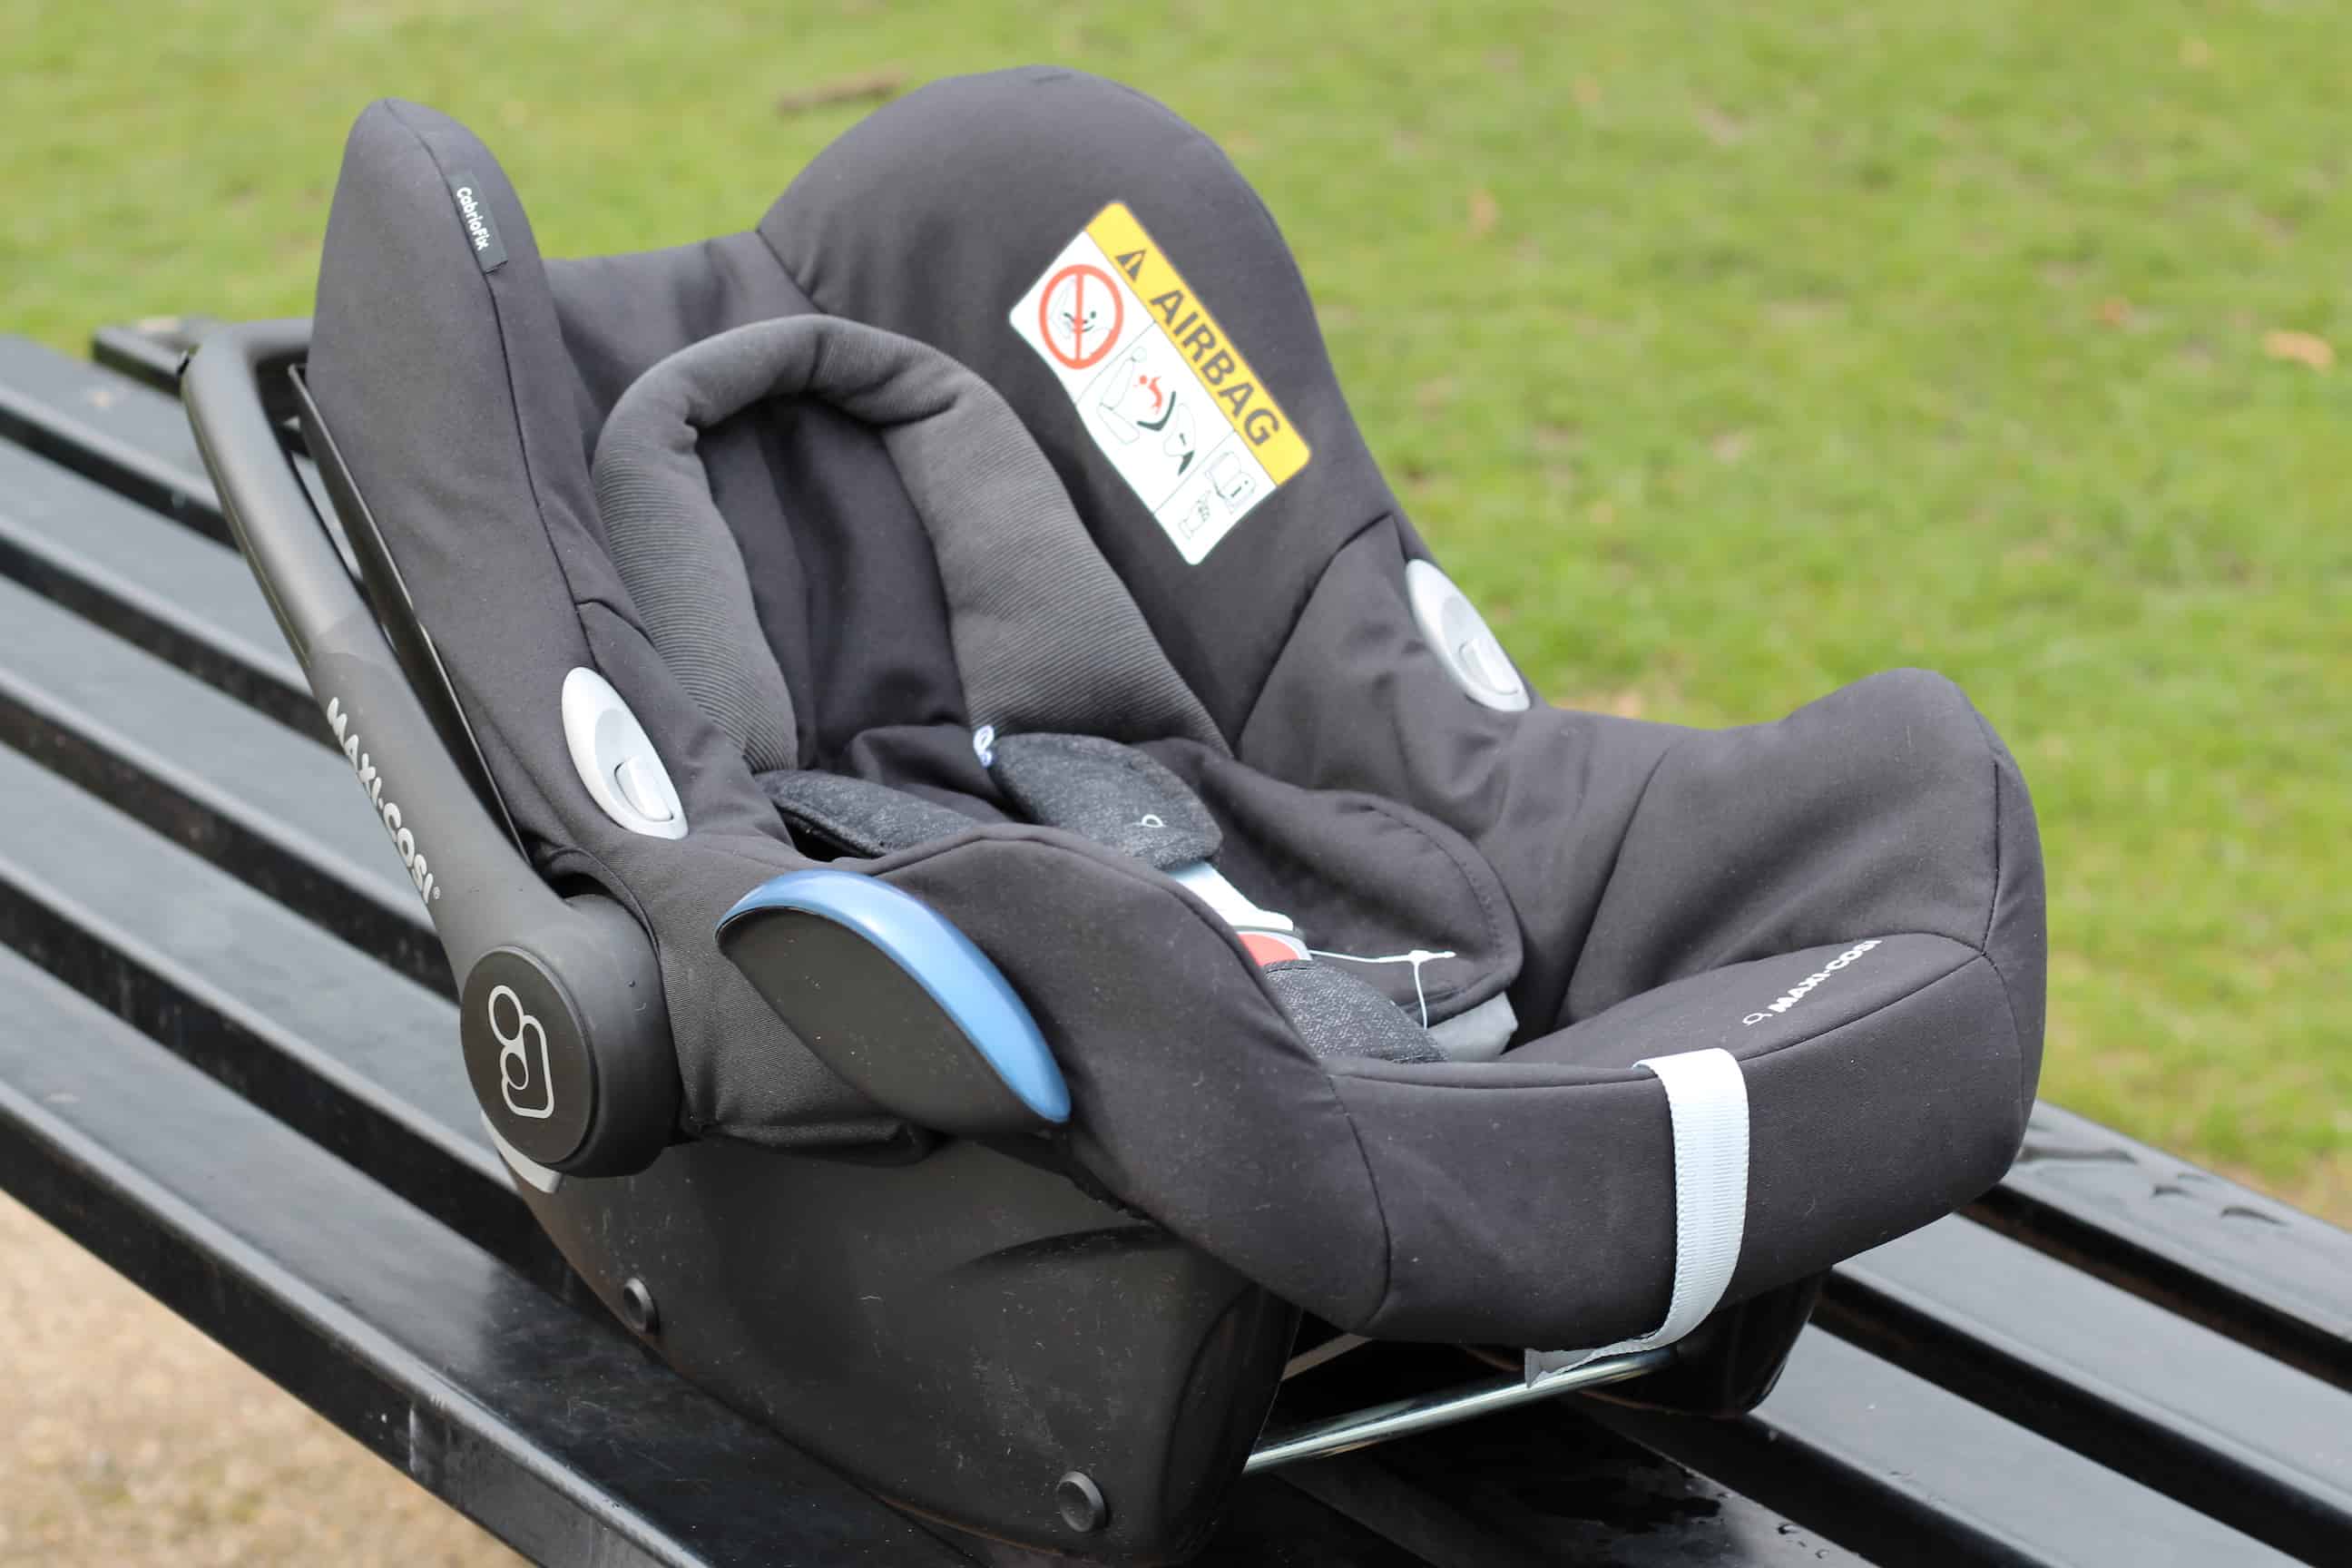 Maxi Cosi Cabriofix Car Seat Group 0 Review Soph Obsessed